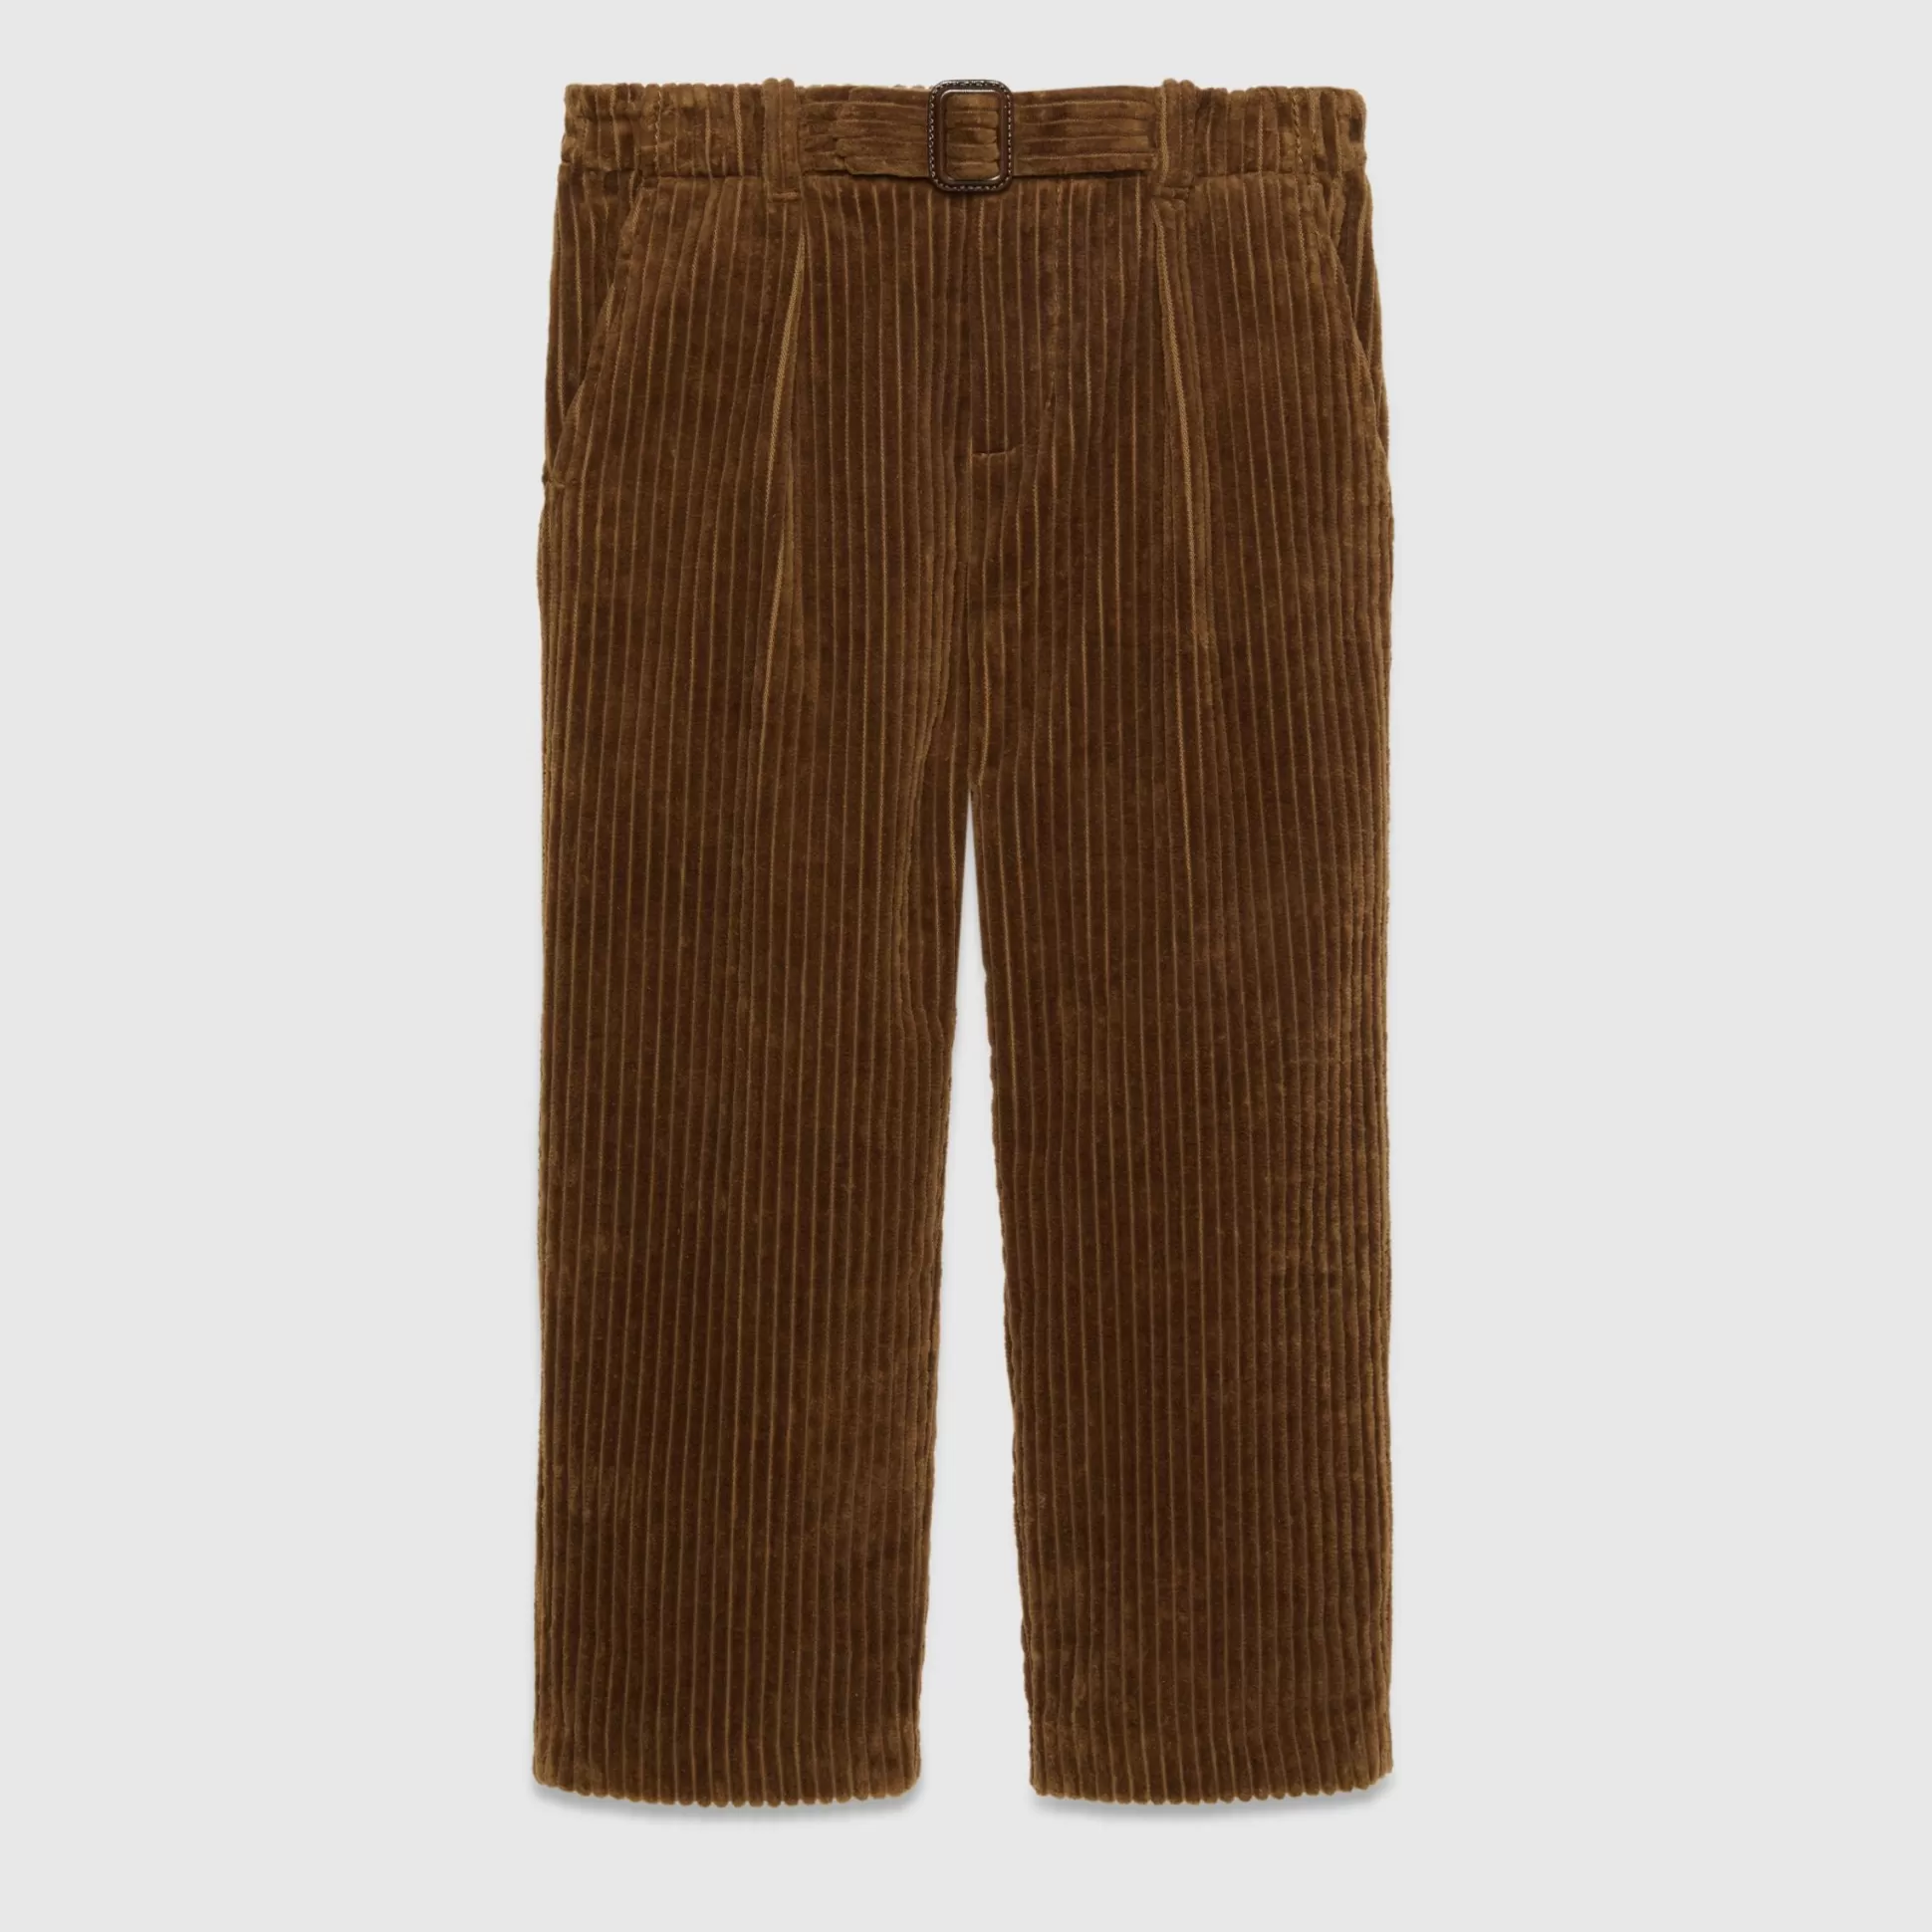 GUCCI Children'S Corduroy Velvet Pant With Patch-Children Clothing (4-12 Years)